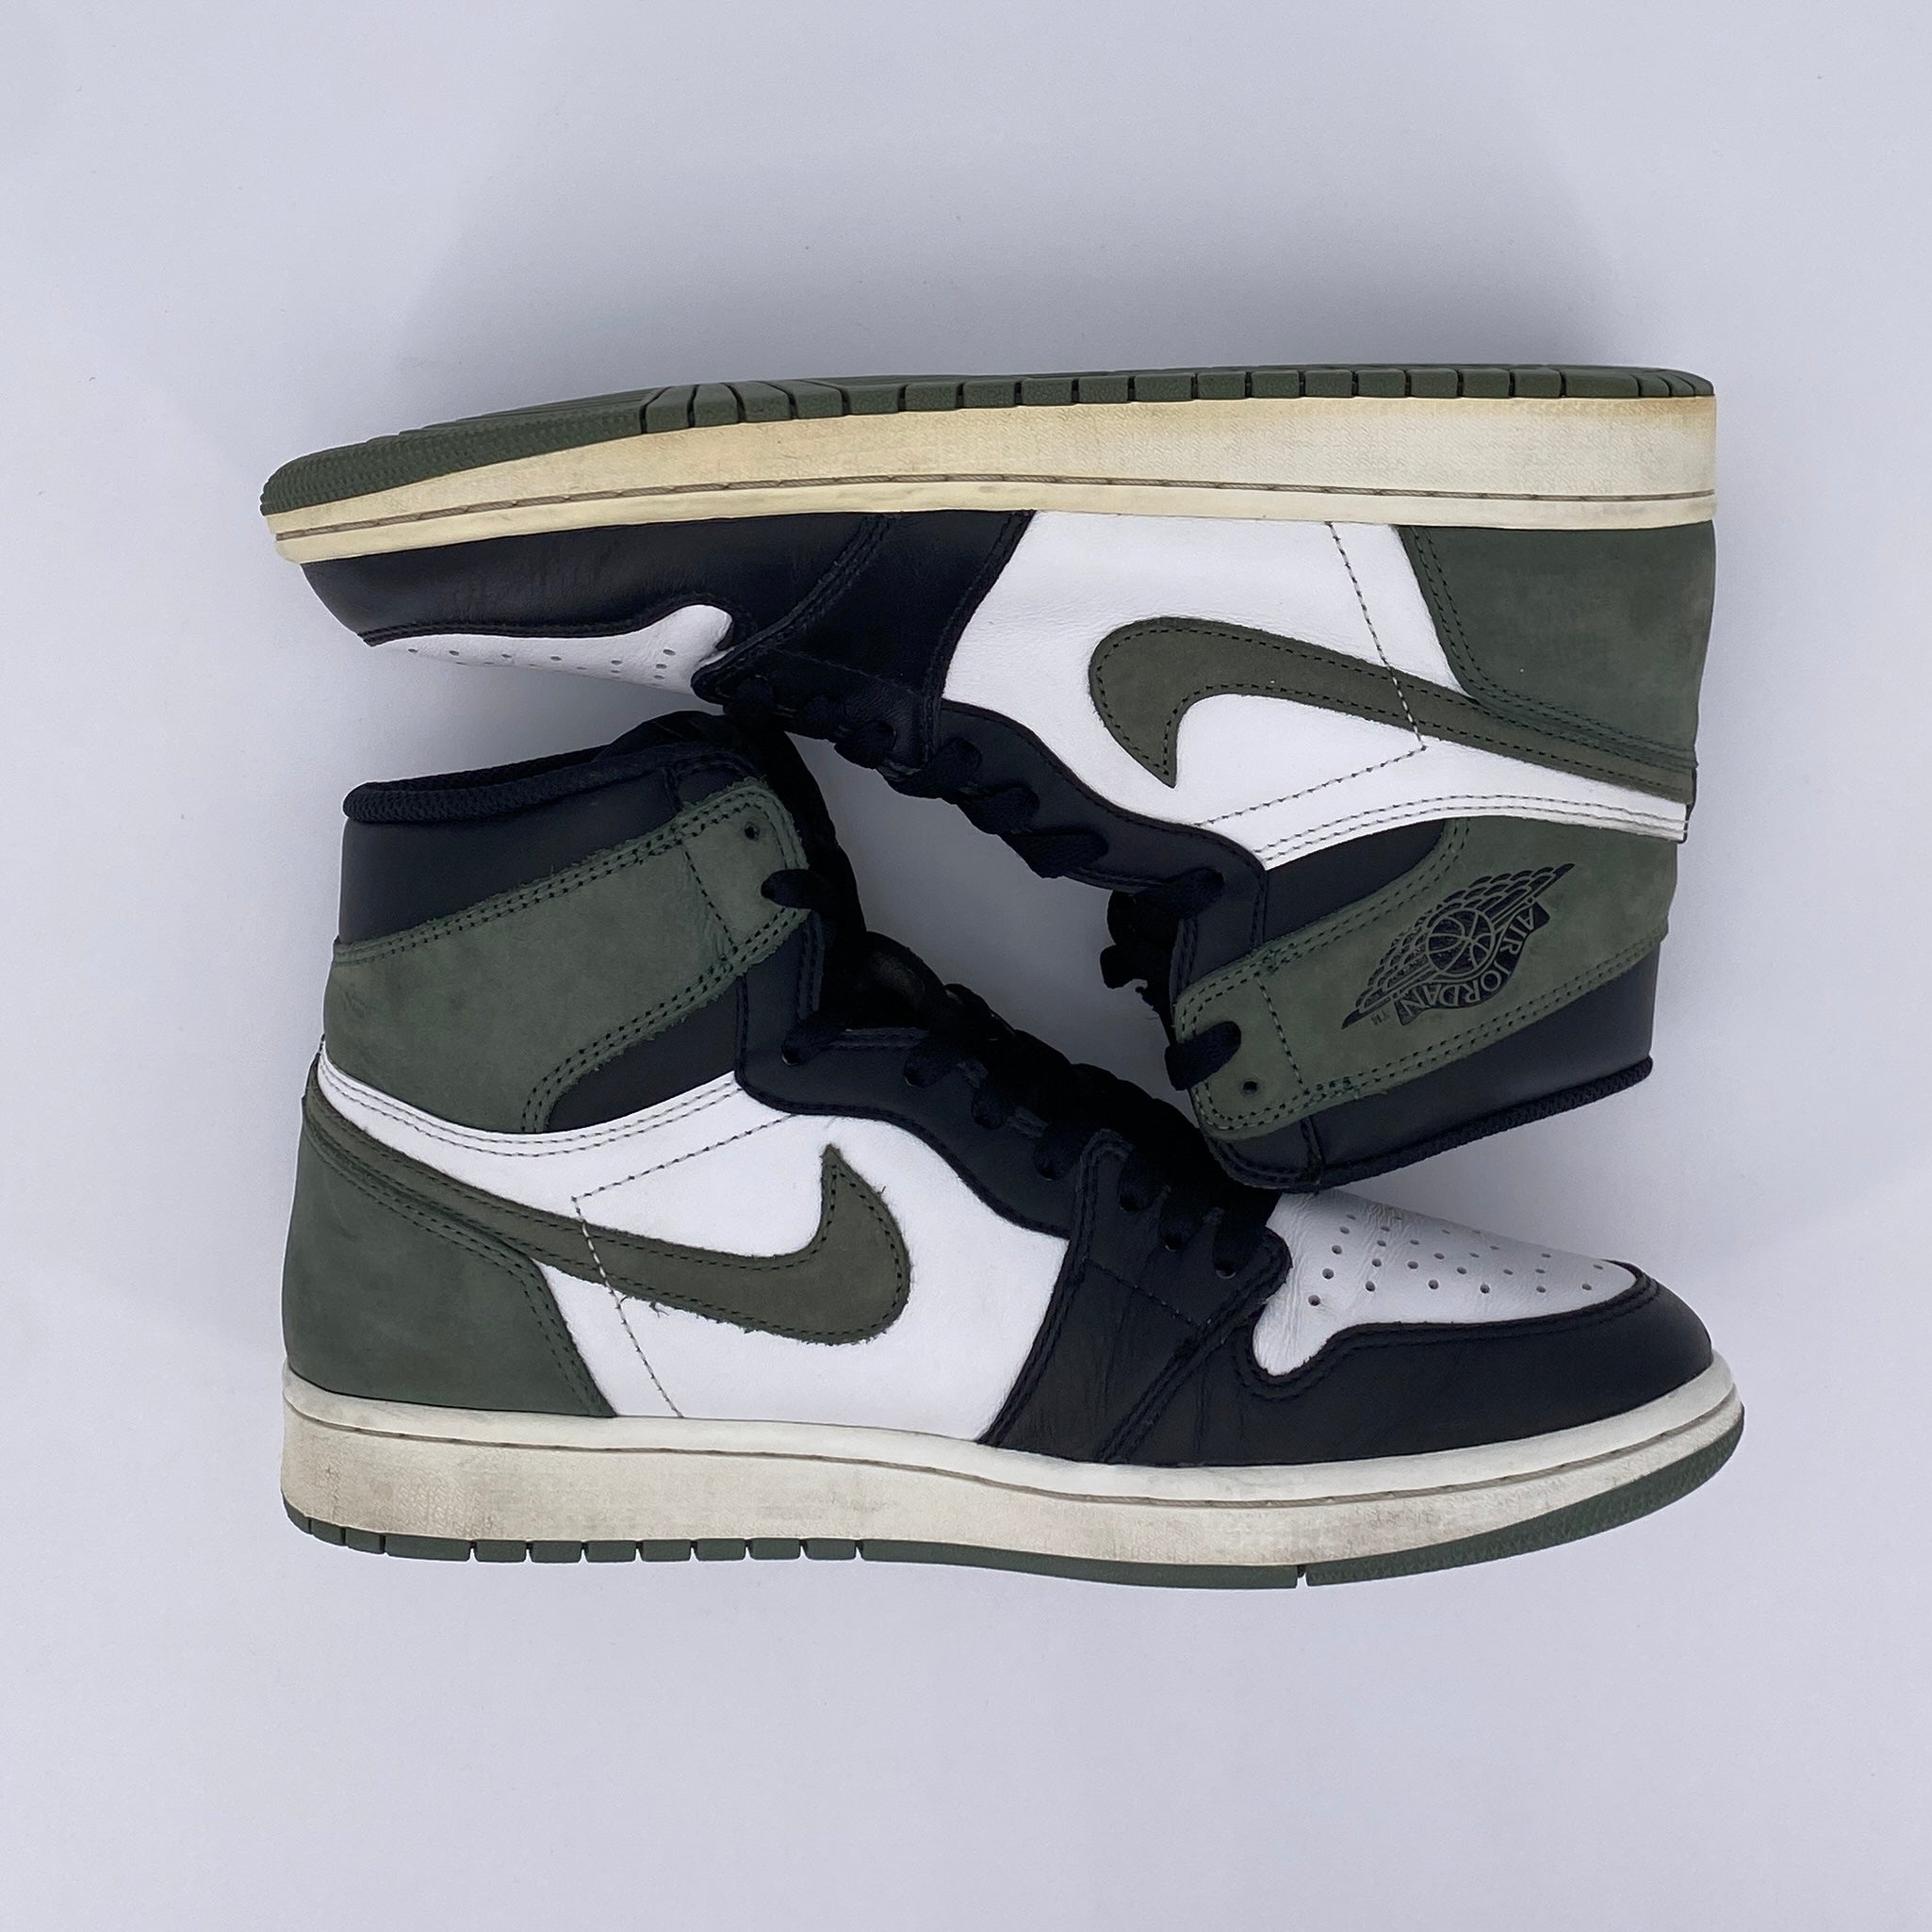 Air Jordan 1 Retro High OG &quot;Clay Green&quot; 2018 Used Size 9